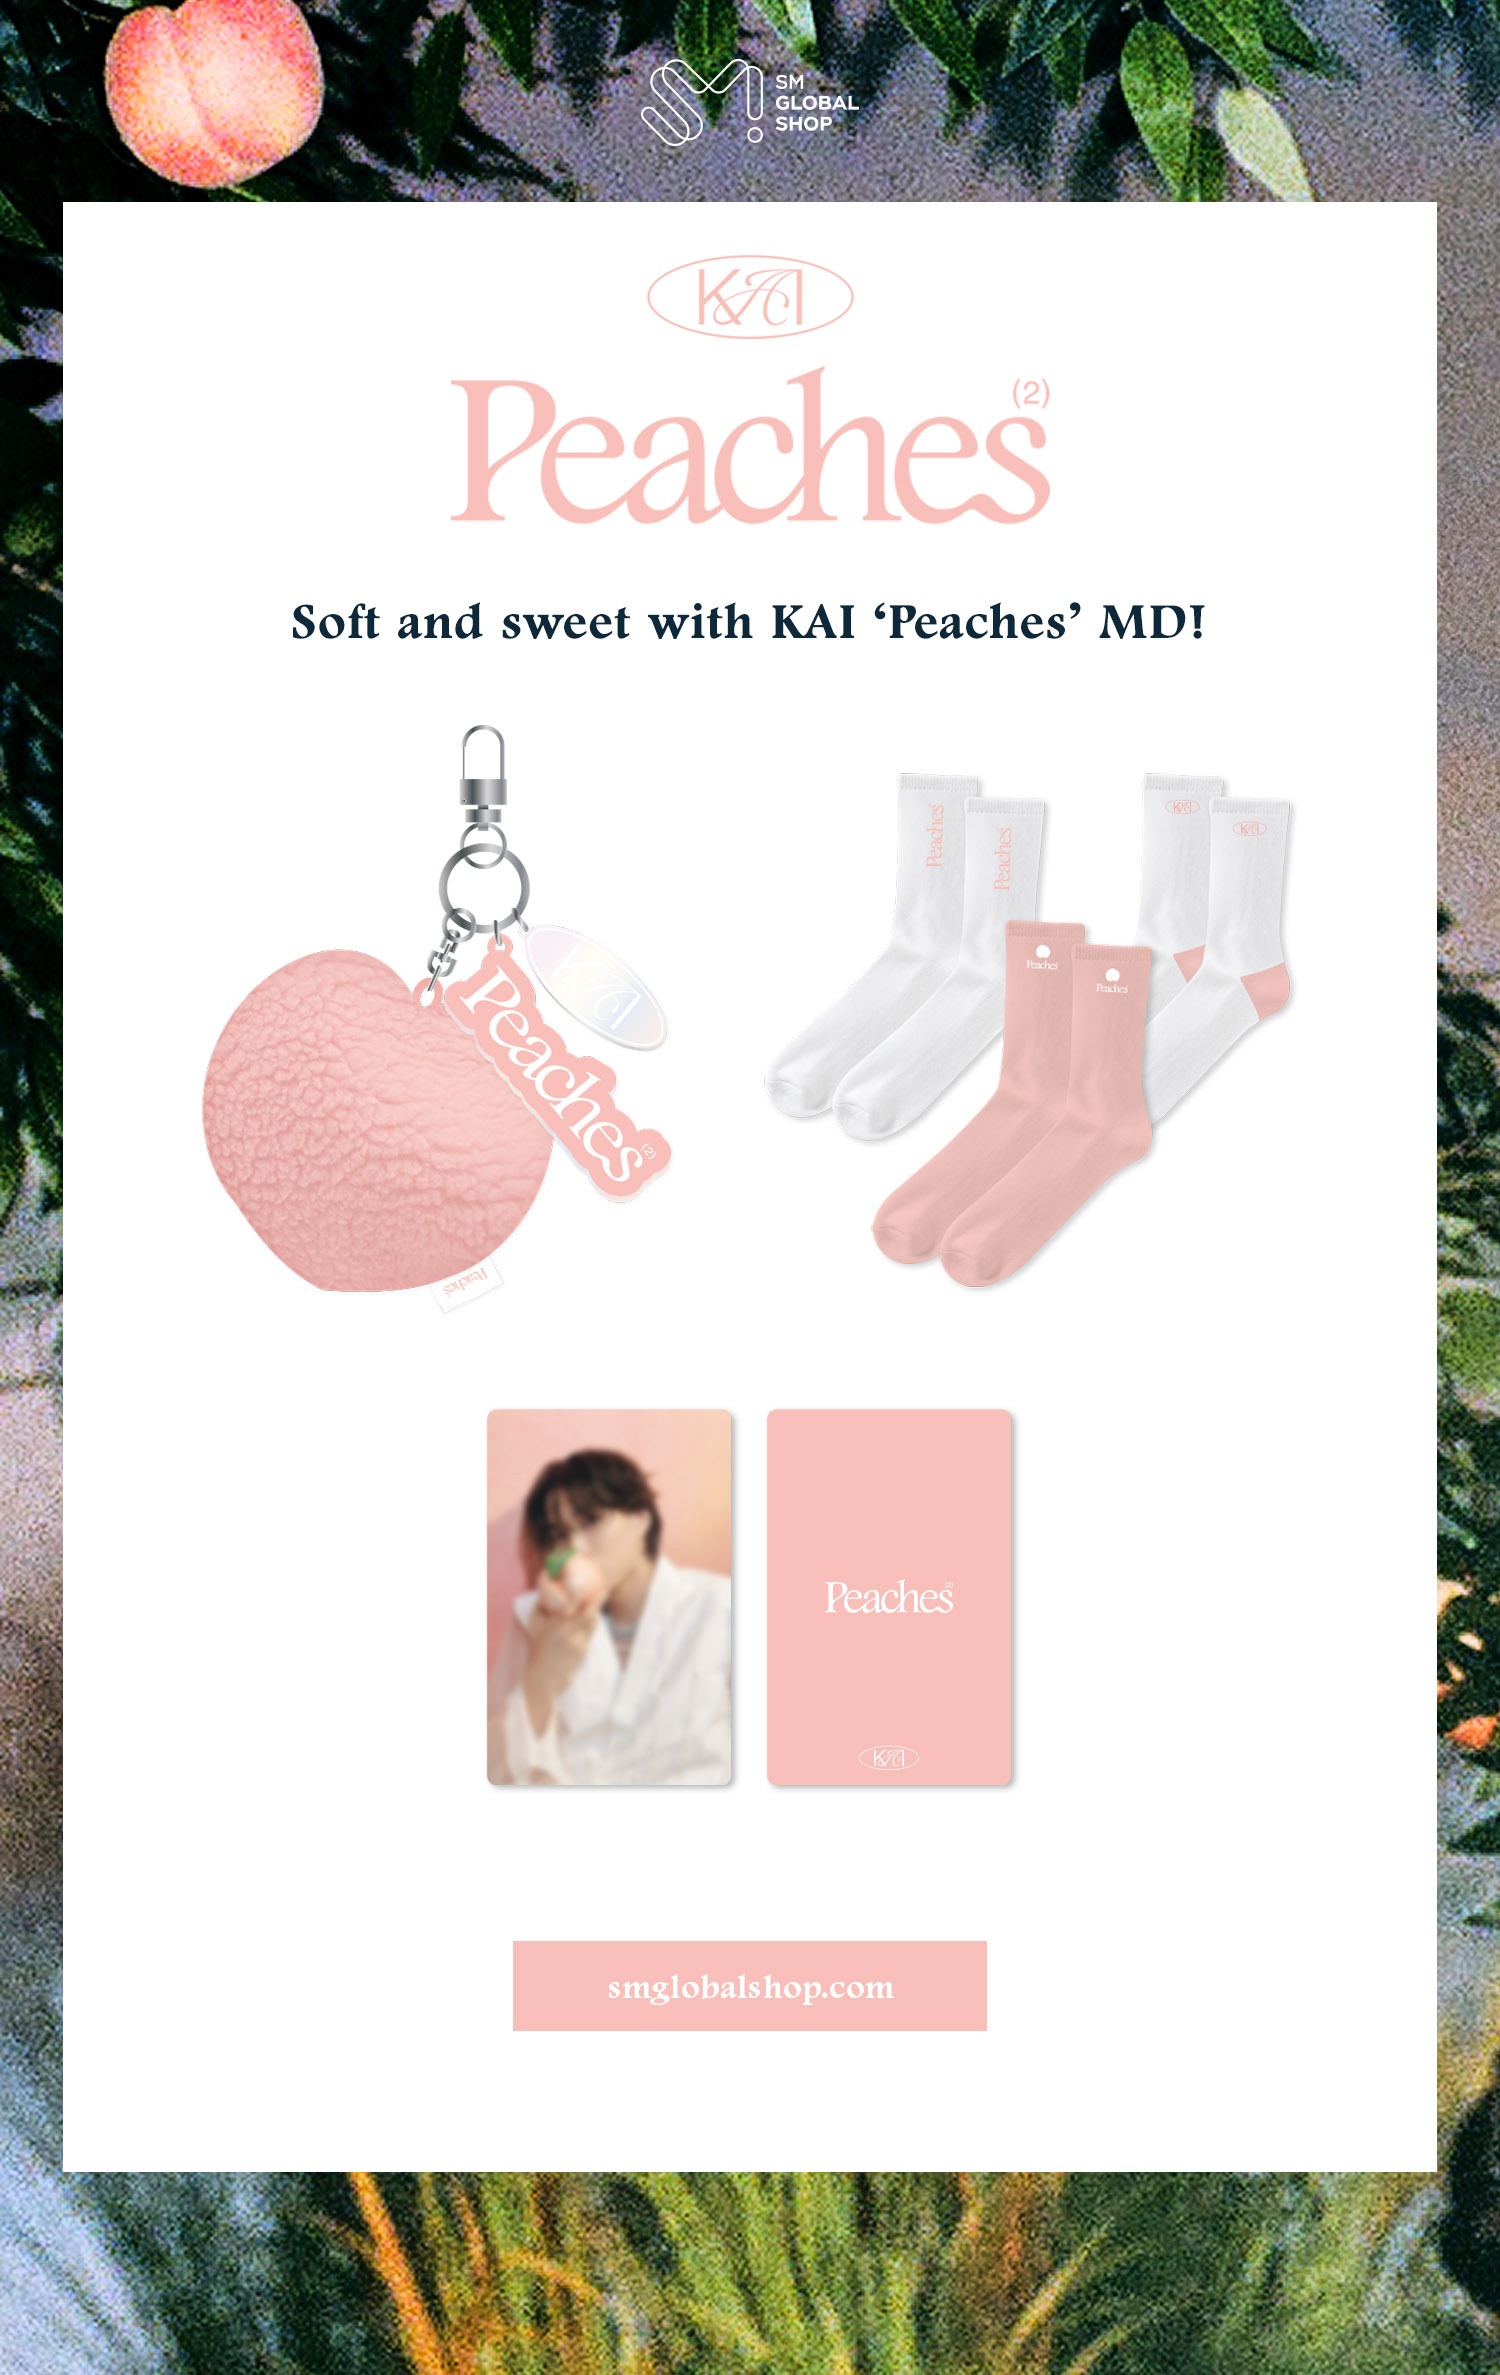 Soft and sweet with KAI 'Peaches' MD! 🍑 - SM Global Shop